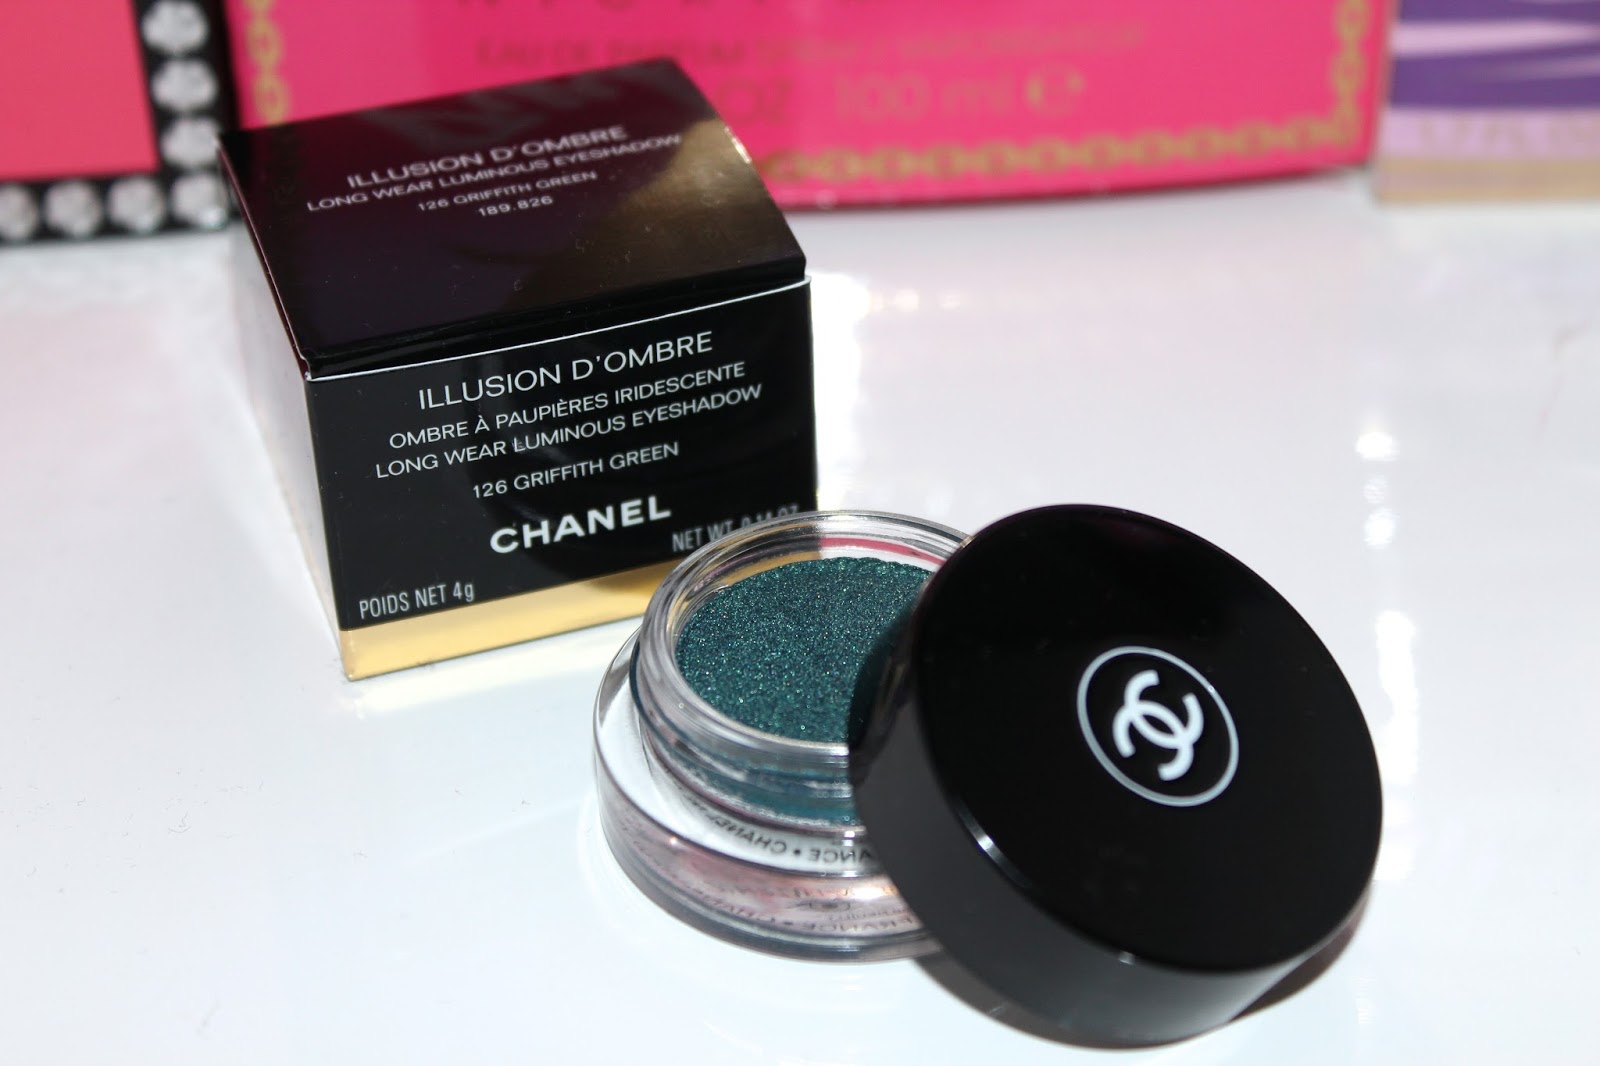 Chanel Illusion D'Ombre Long Wear Luminous Eyeshadow # 126 Griffith Green